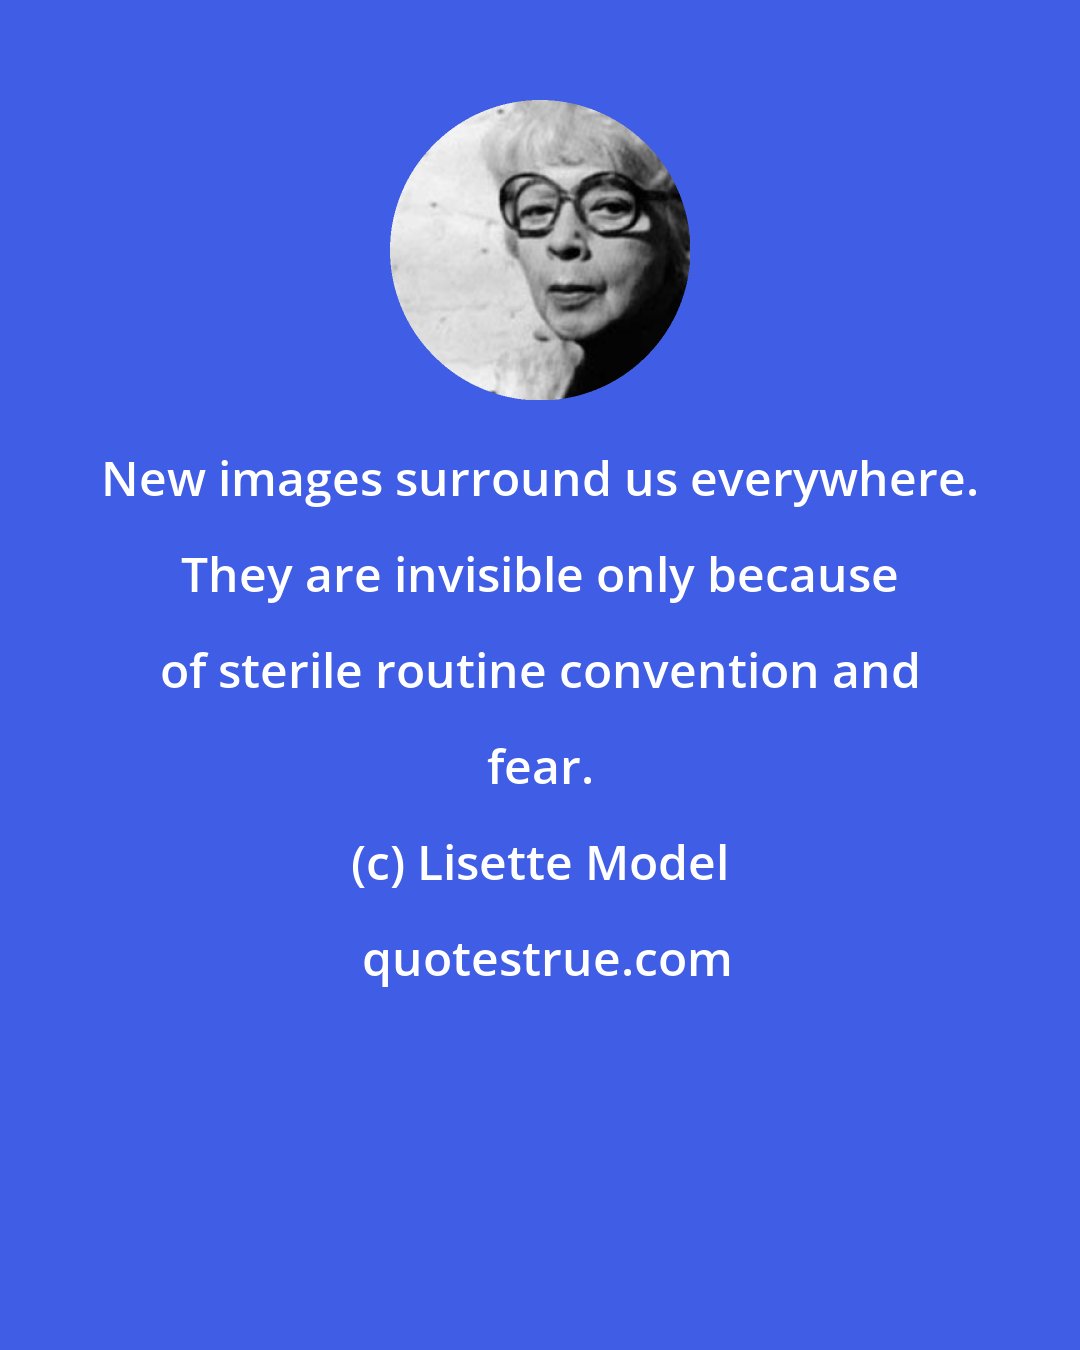 Lisette Model: New images surround us everywhere. They are invisible only because of sterile routine convention and fear.